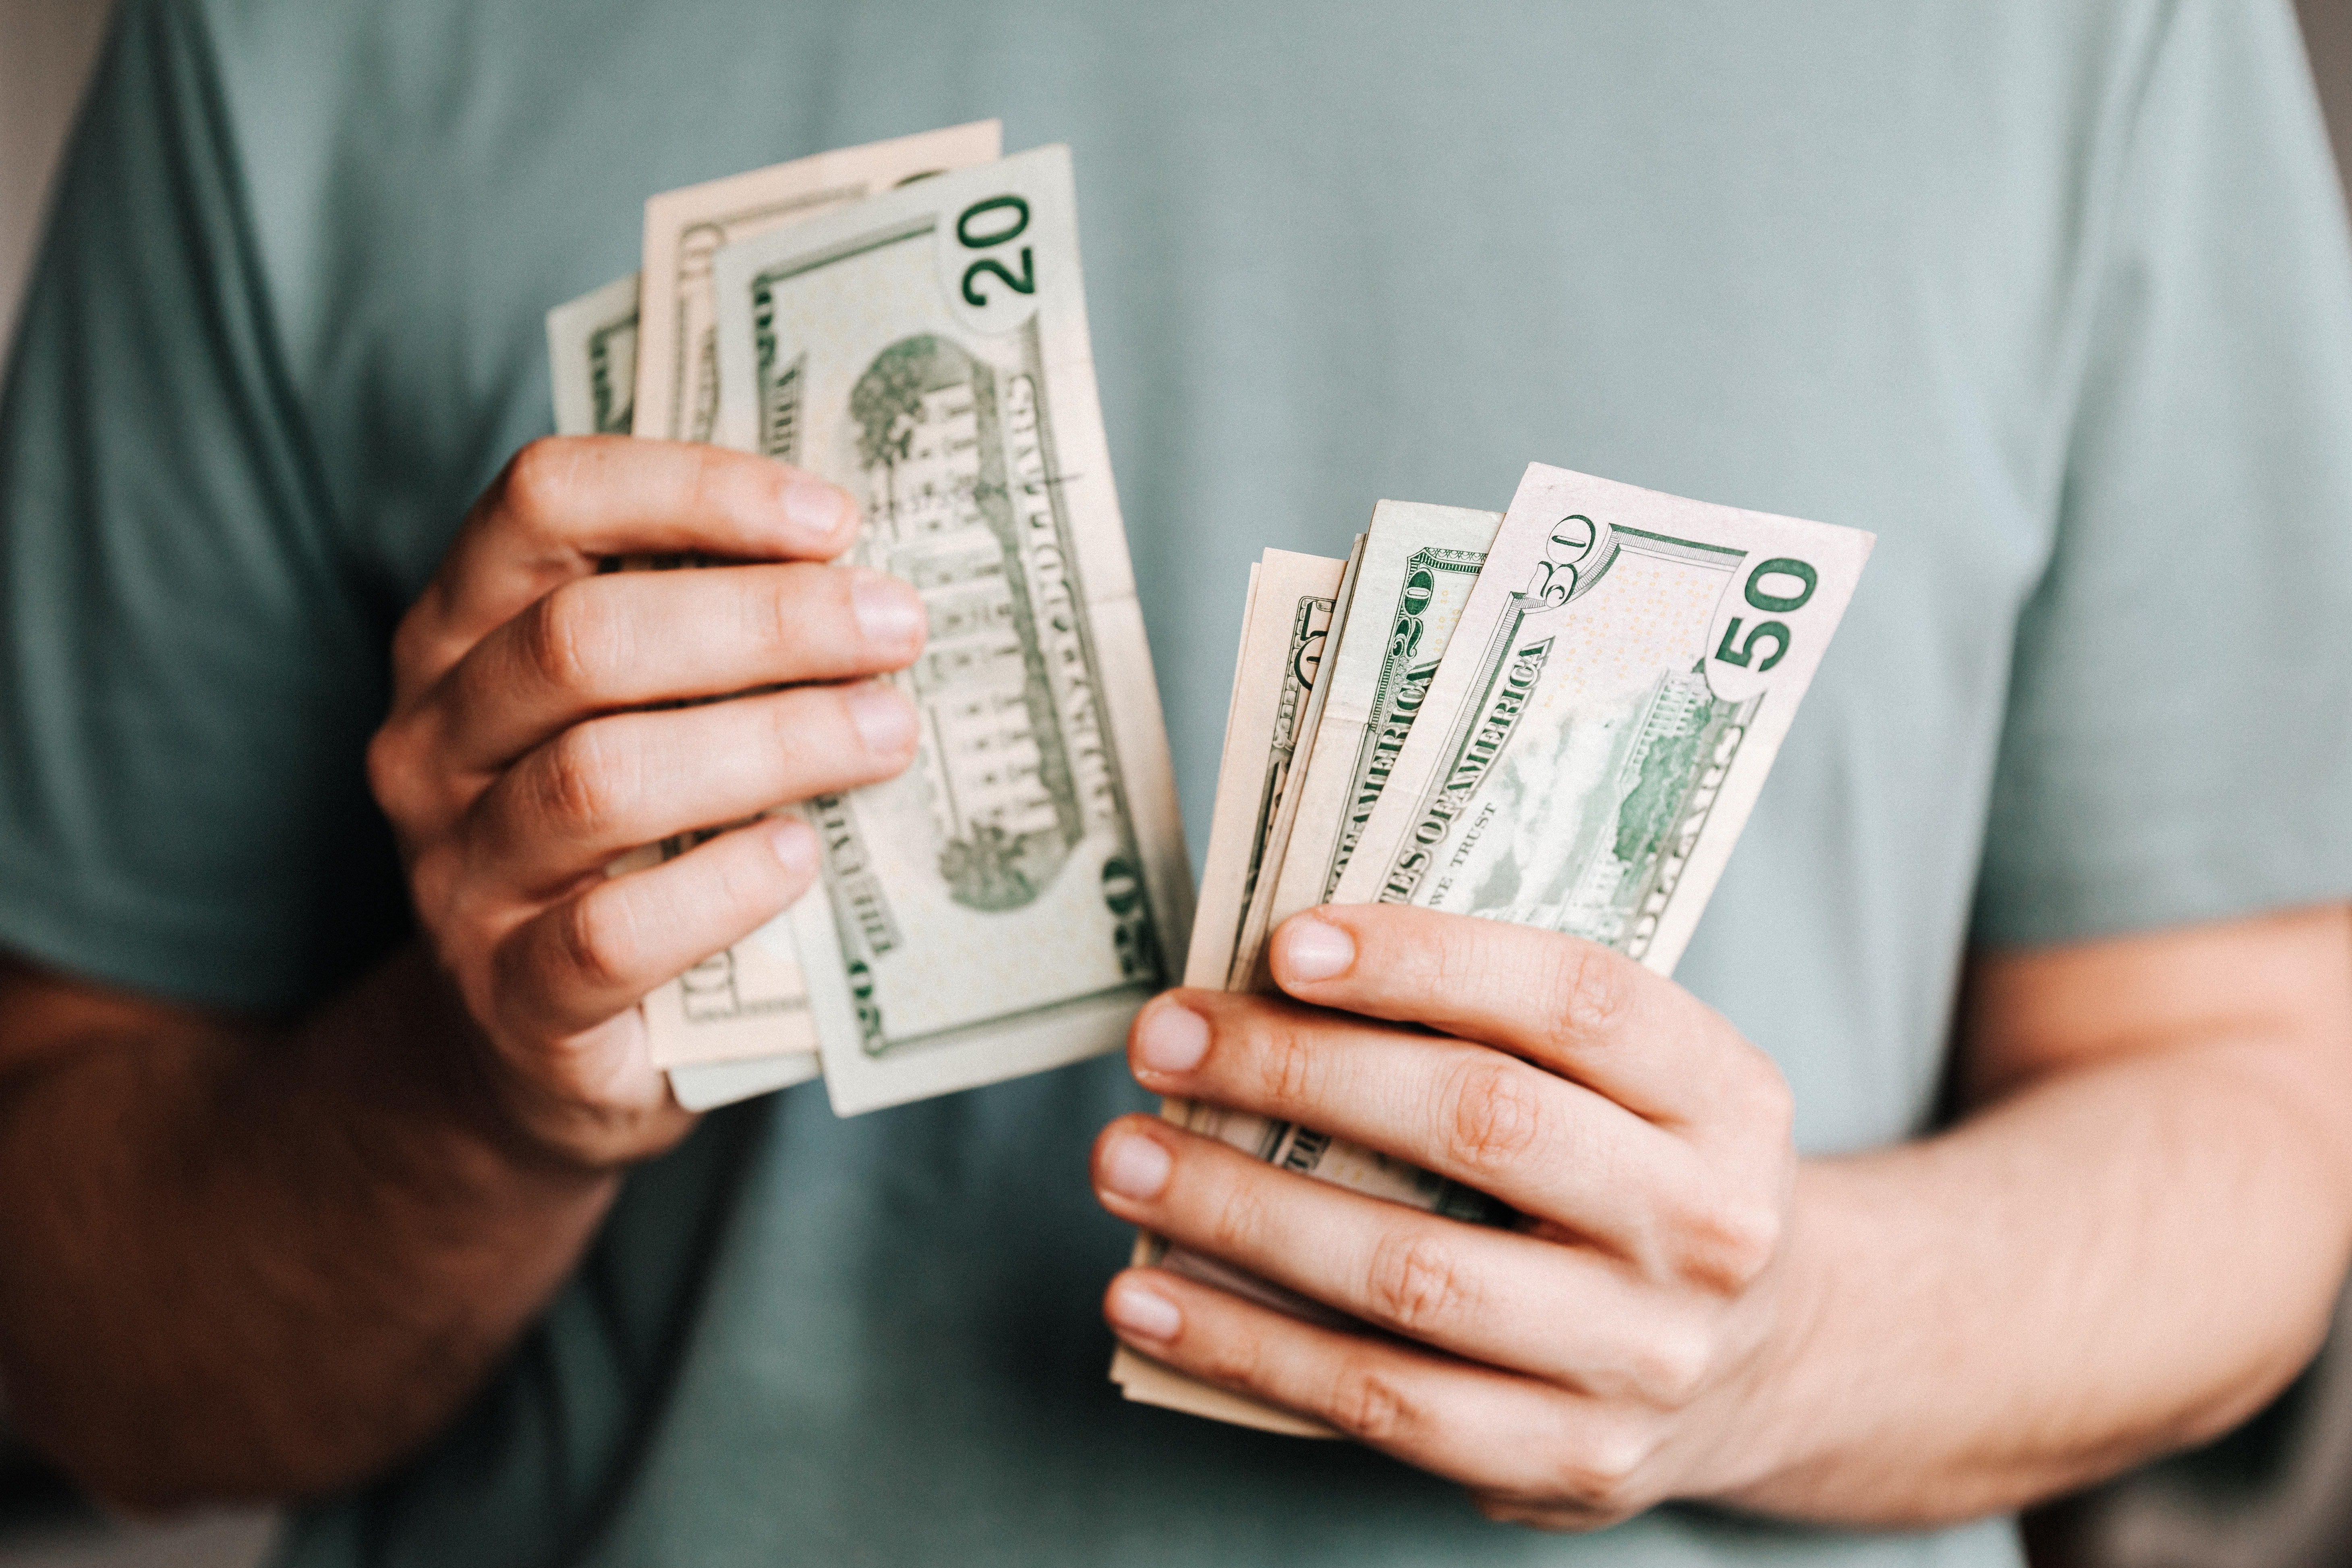 The man felt sorry for Jack & gave him $150 for washing his car windows. | Source: Pexels